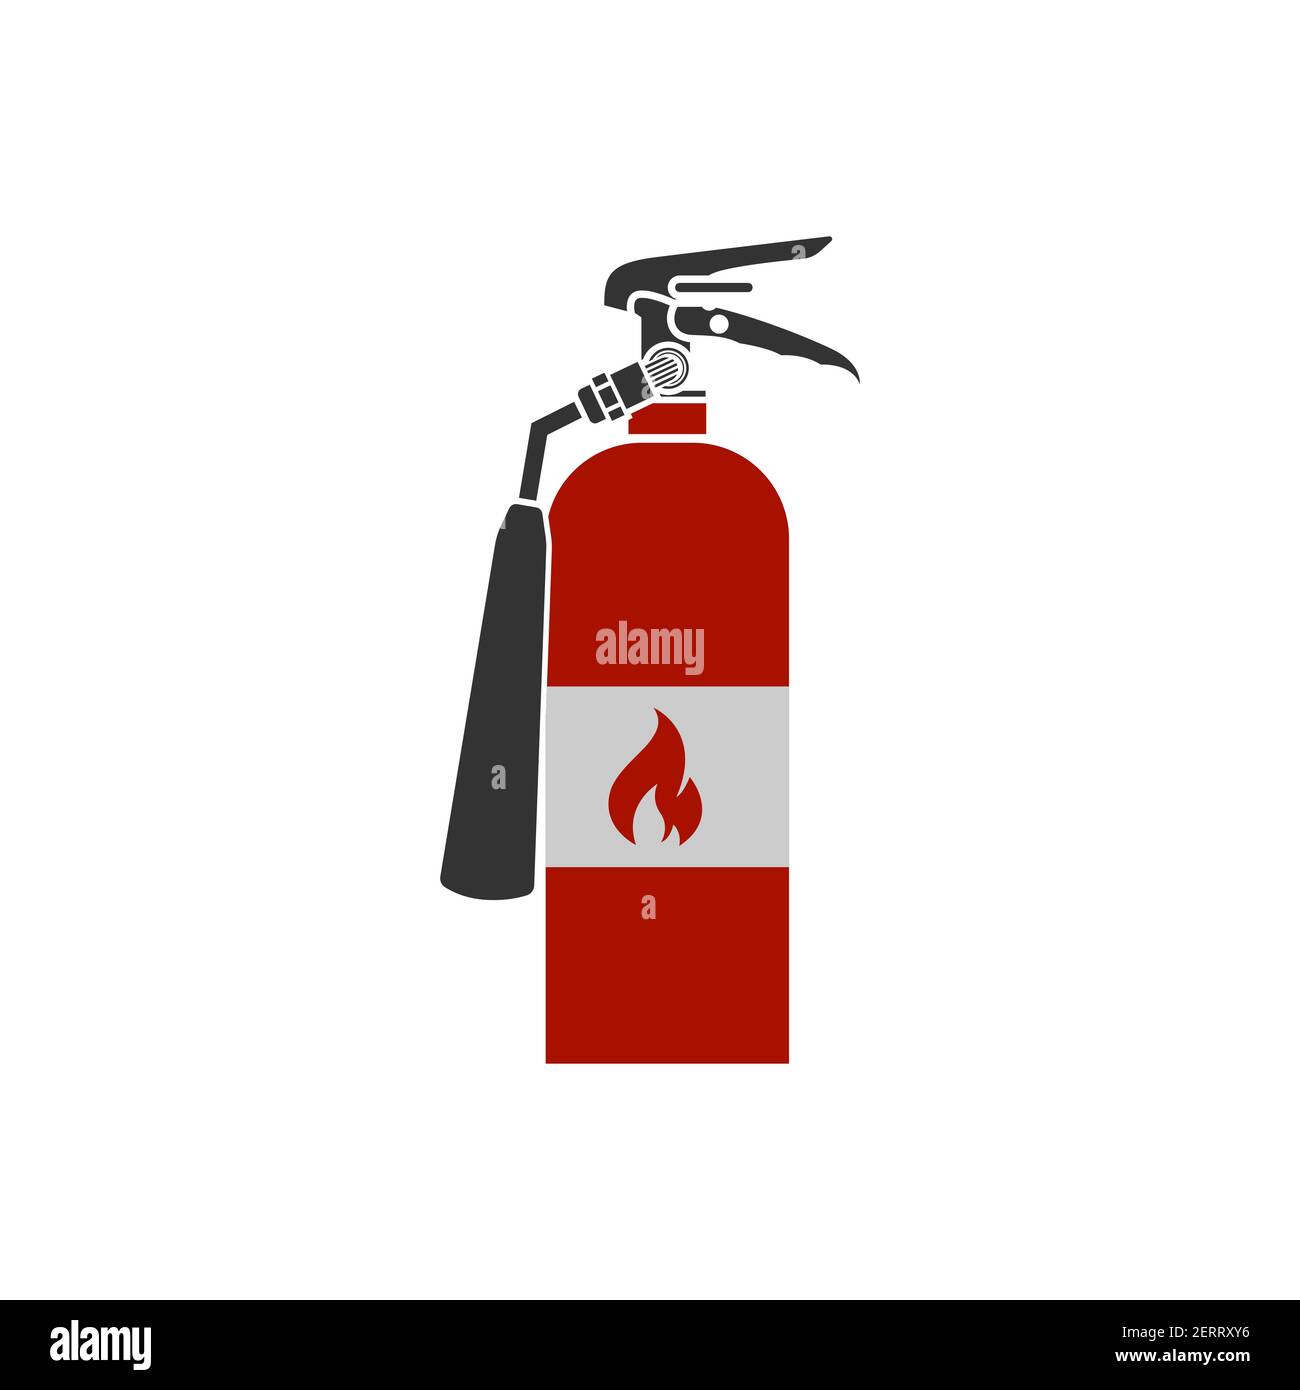 Realistic vector fire extinguisher icon. Portable device for extinguishing fires by releasing stored extinguishing agent. Stock Vector